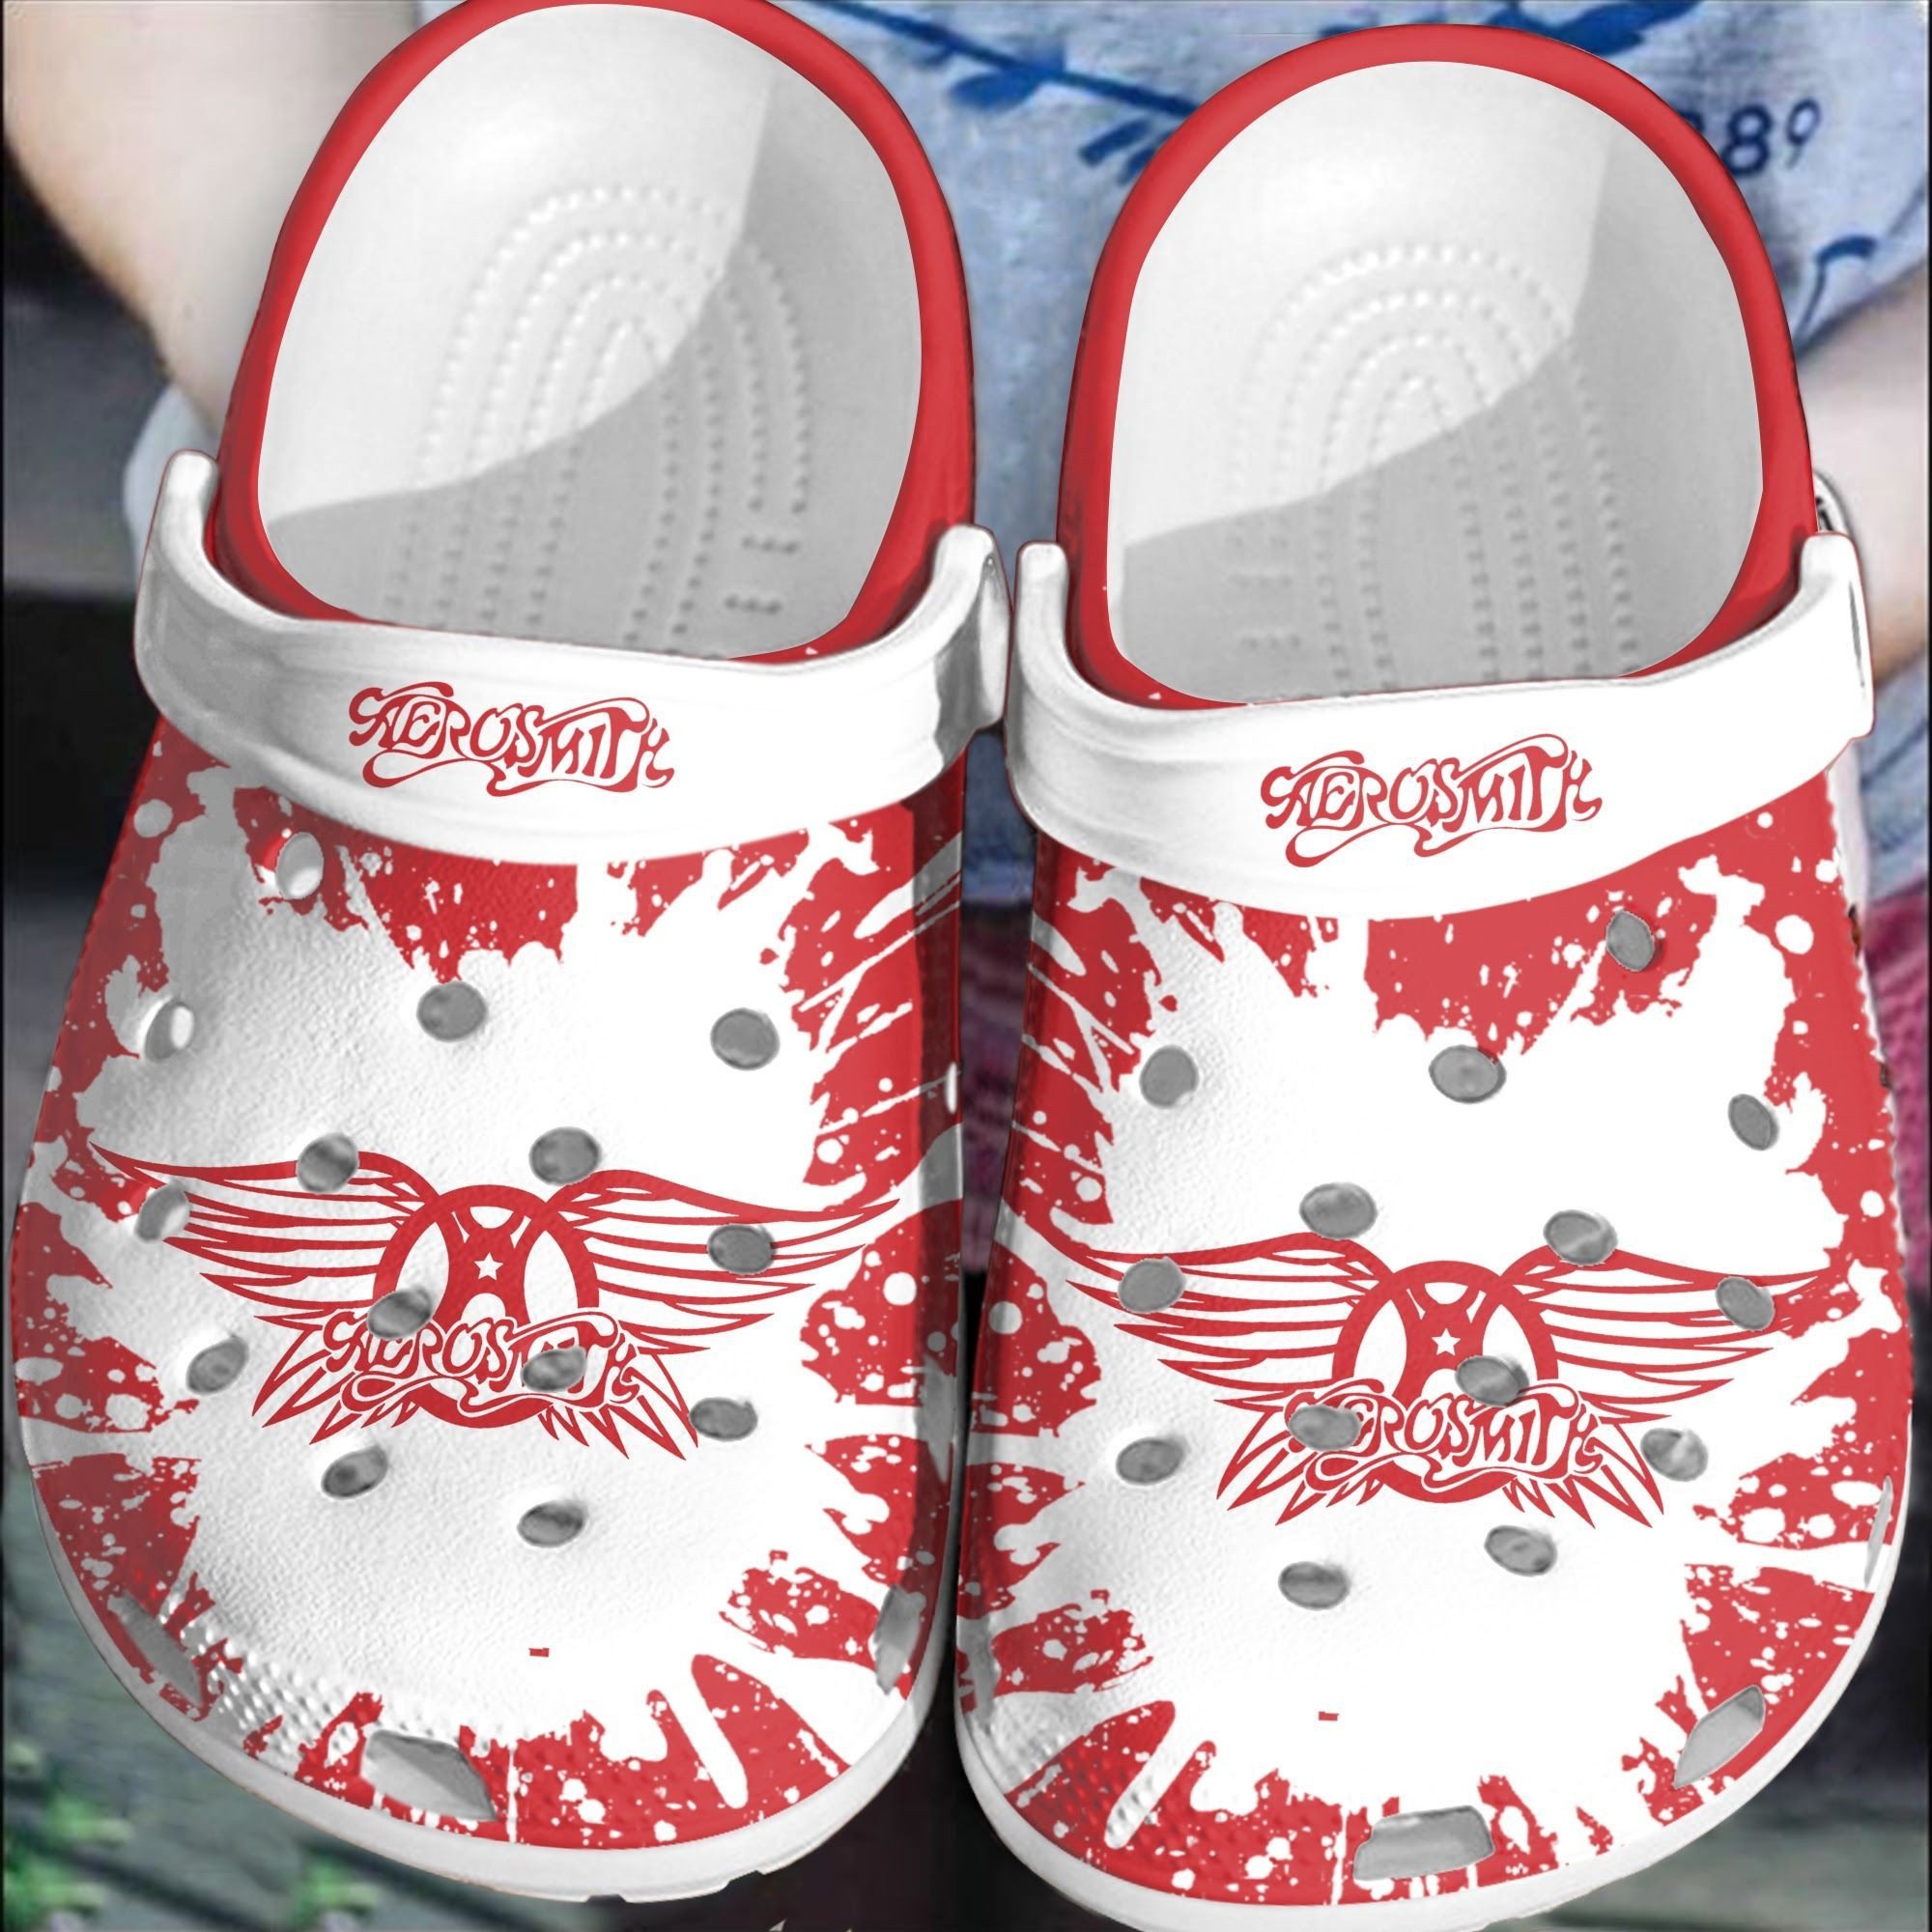 Aerosmith Rock Band For Mens And Womens Gift For Fan Classic Water Rubber Crocss Crocband Clogs, Comfy Footwear